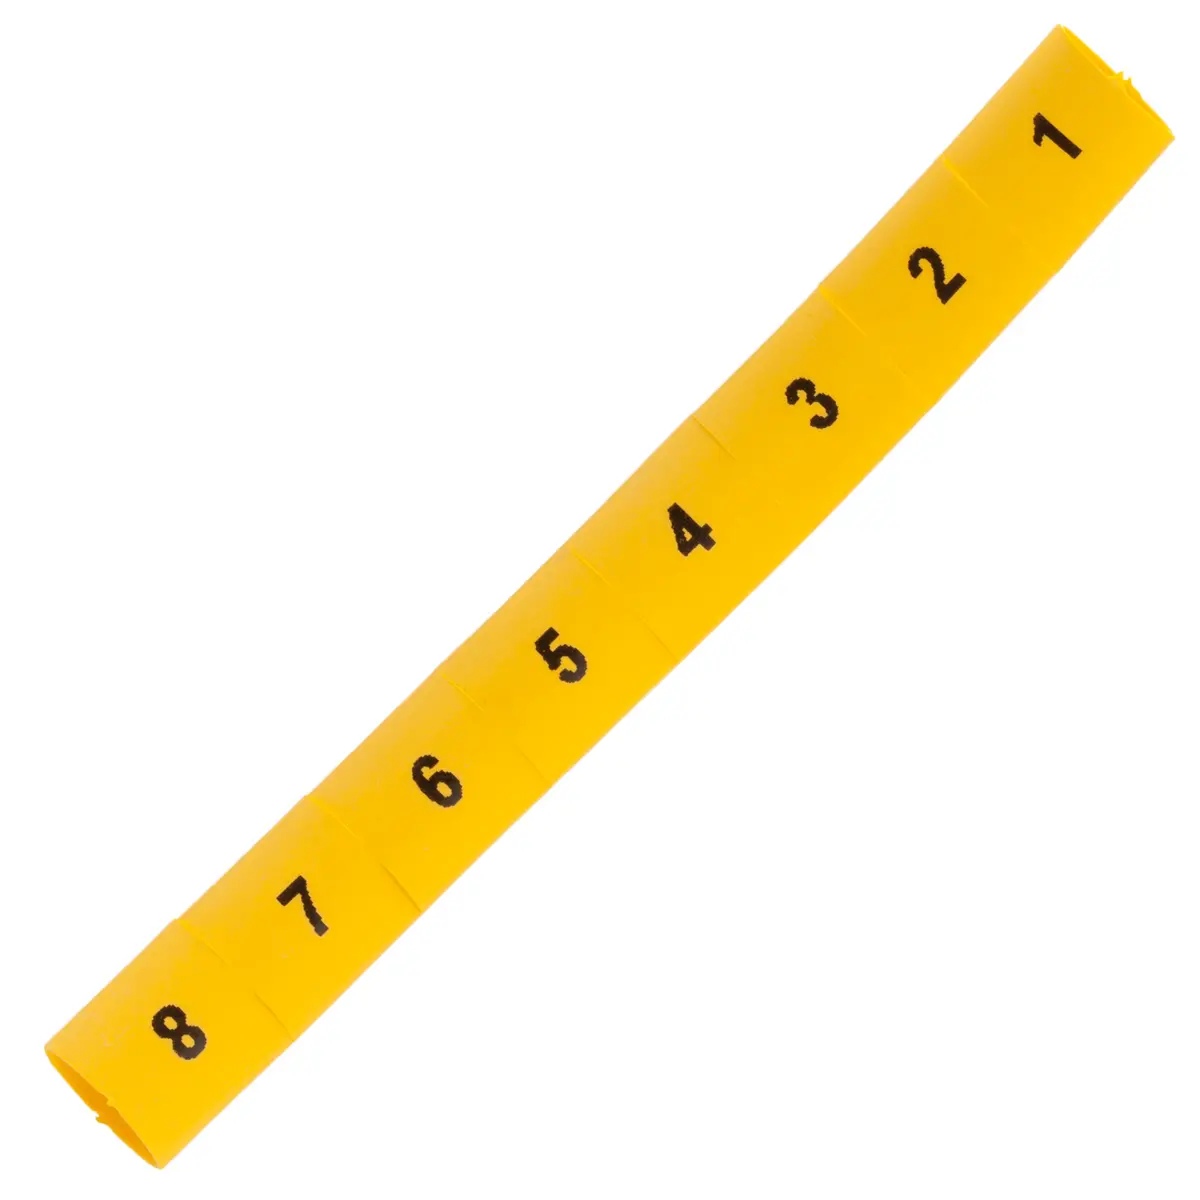 1-8 MARKERS YELLOW SHRINK